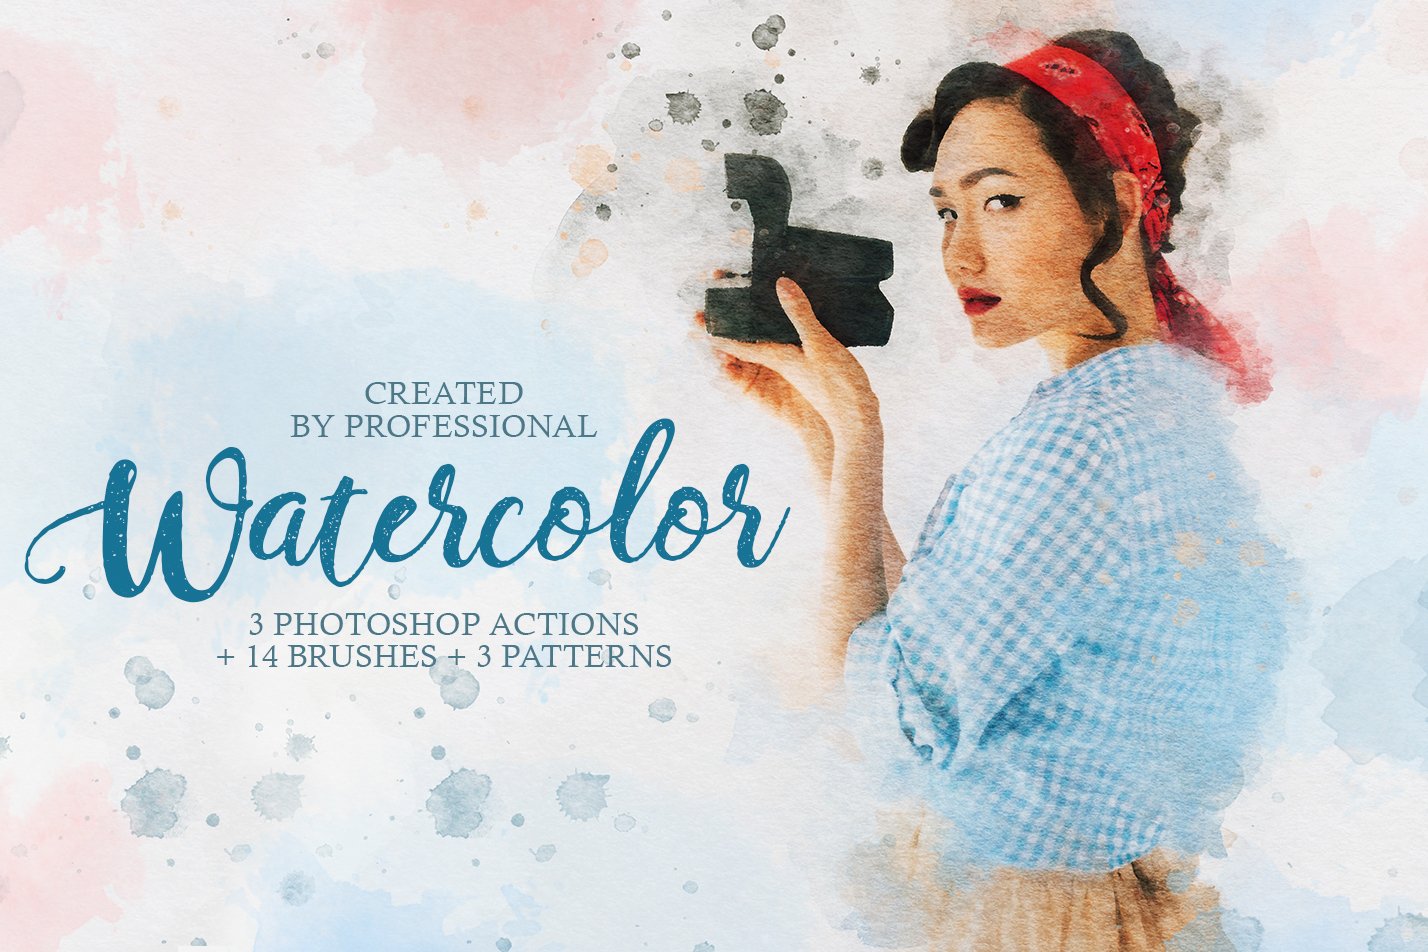 Watercolor Painter Photoshop Actionscover image.